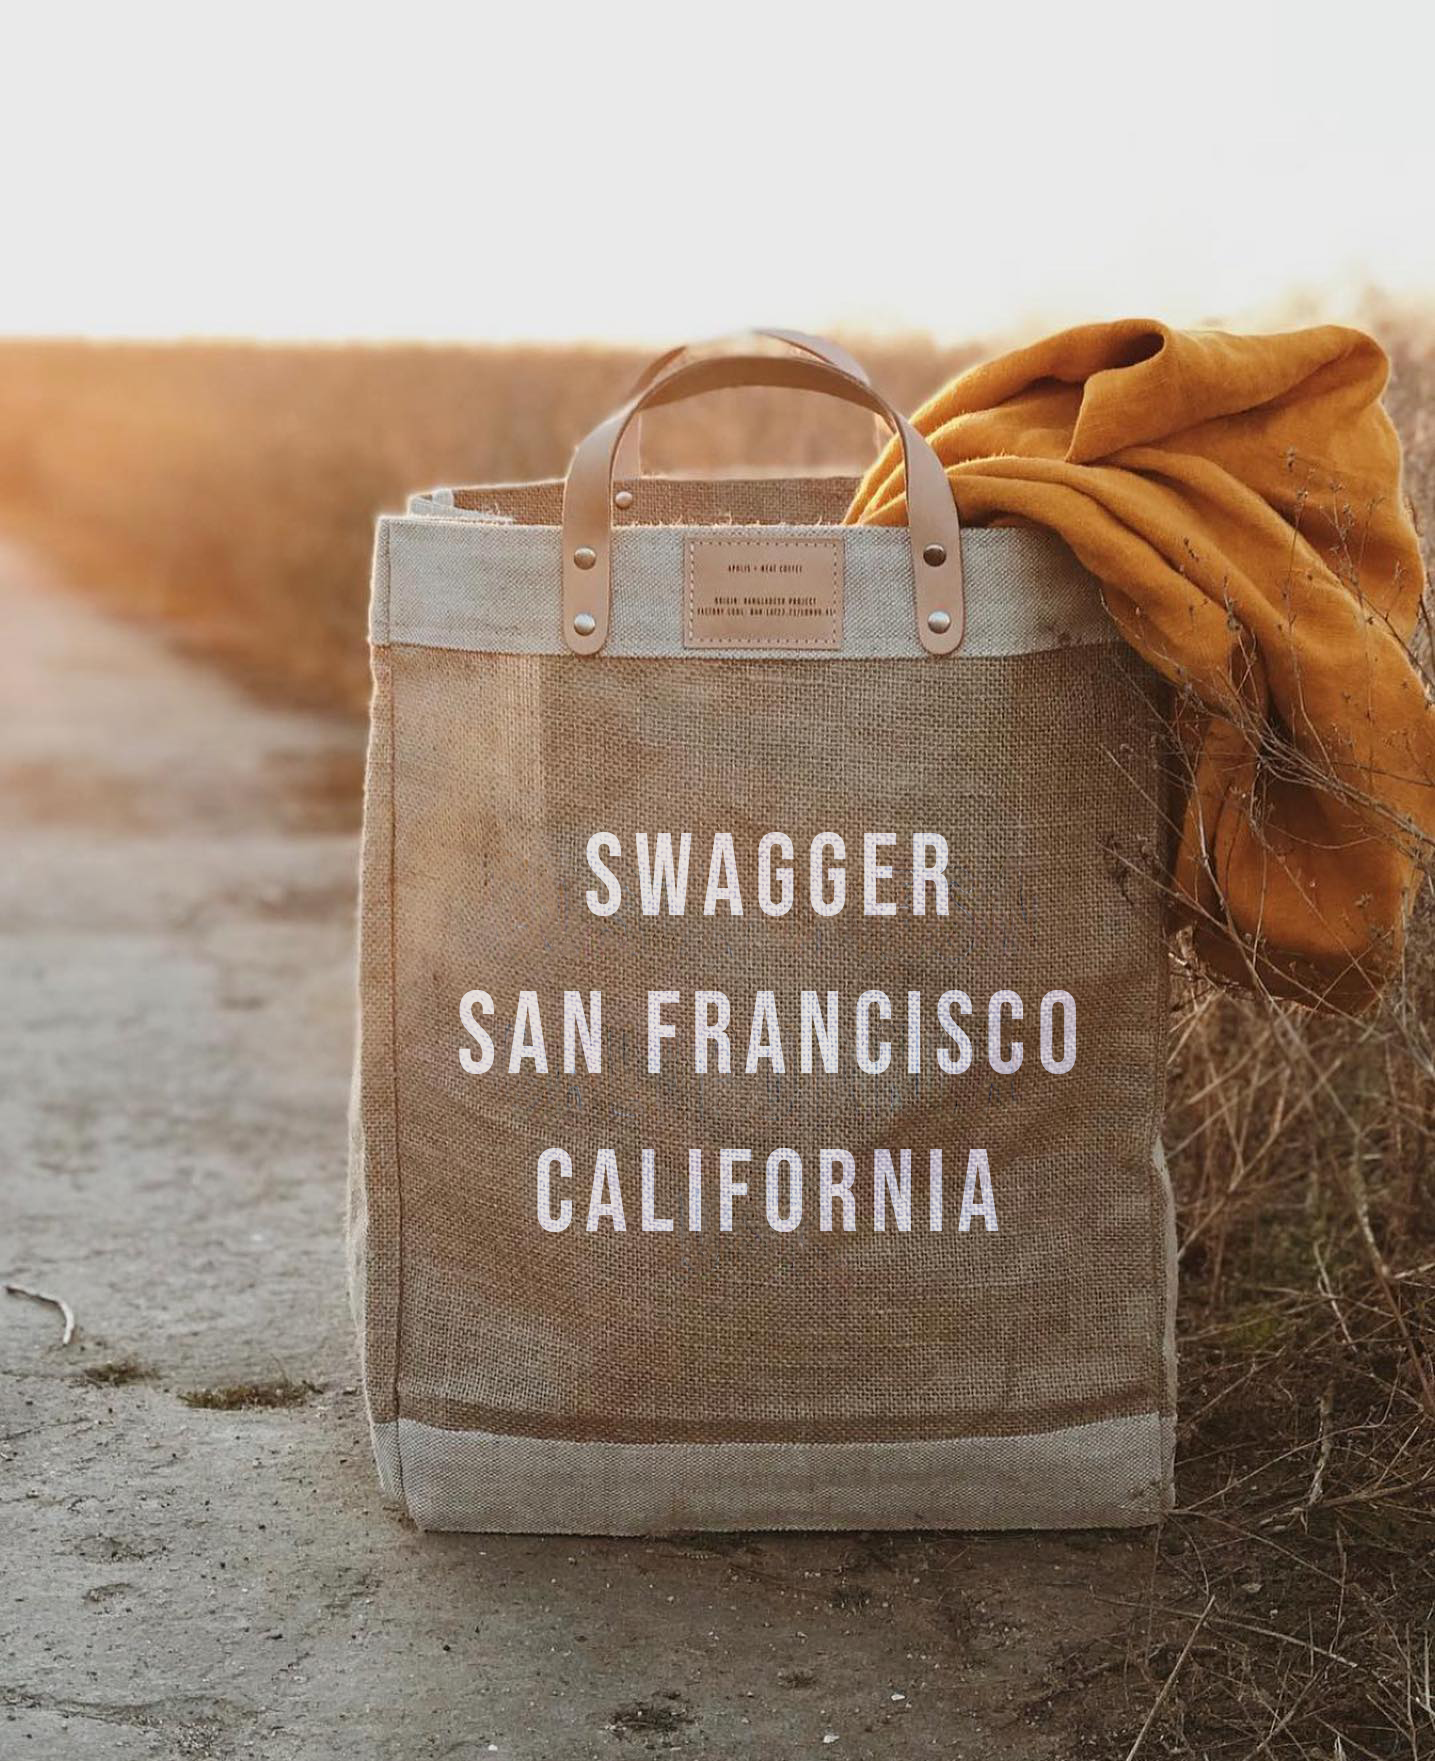 Apolis Market Bag being shown with picnic blanket sticking out, and “Swagger San Francisco California” printed on the bag. Curated by Swagger.